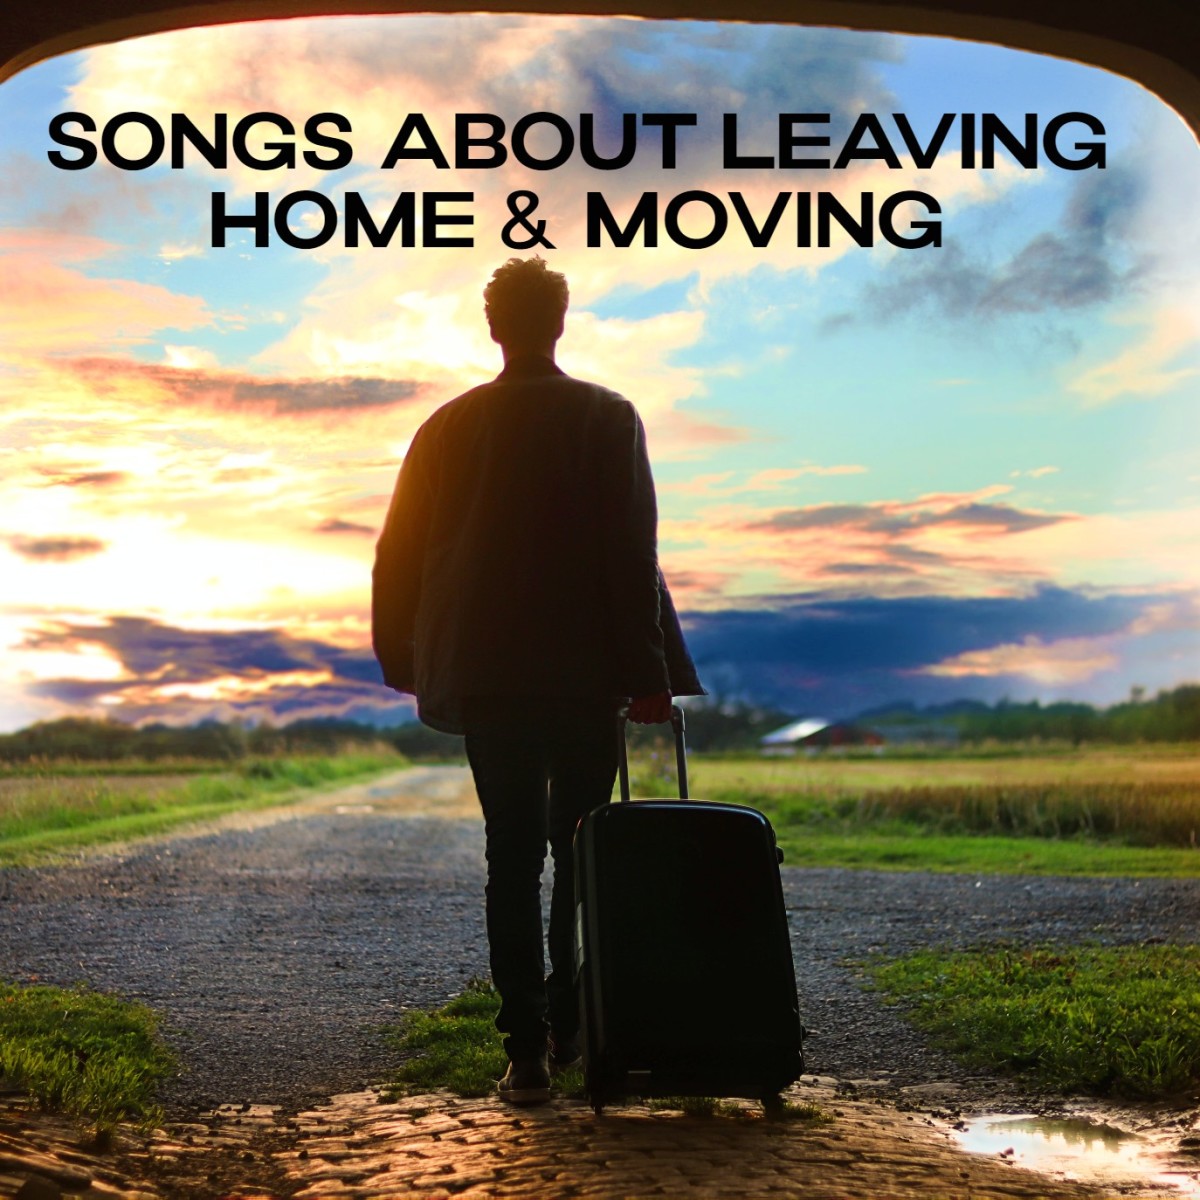 Whether you're leaving home for the first time or moving house for some  other reason, make a playlist of pop, rock, and country songs to help you get through the journey.